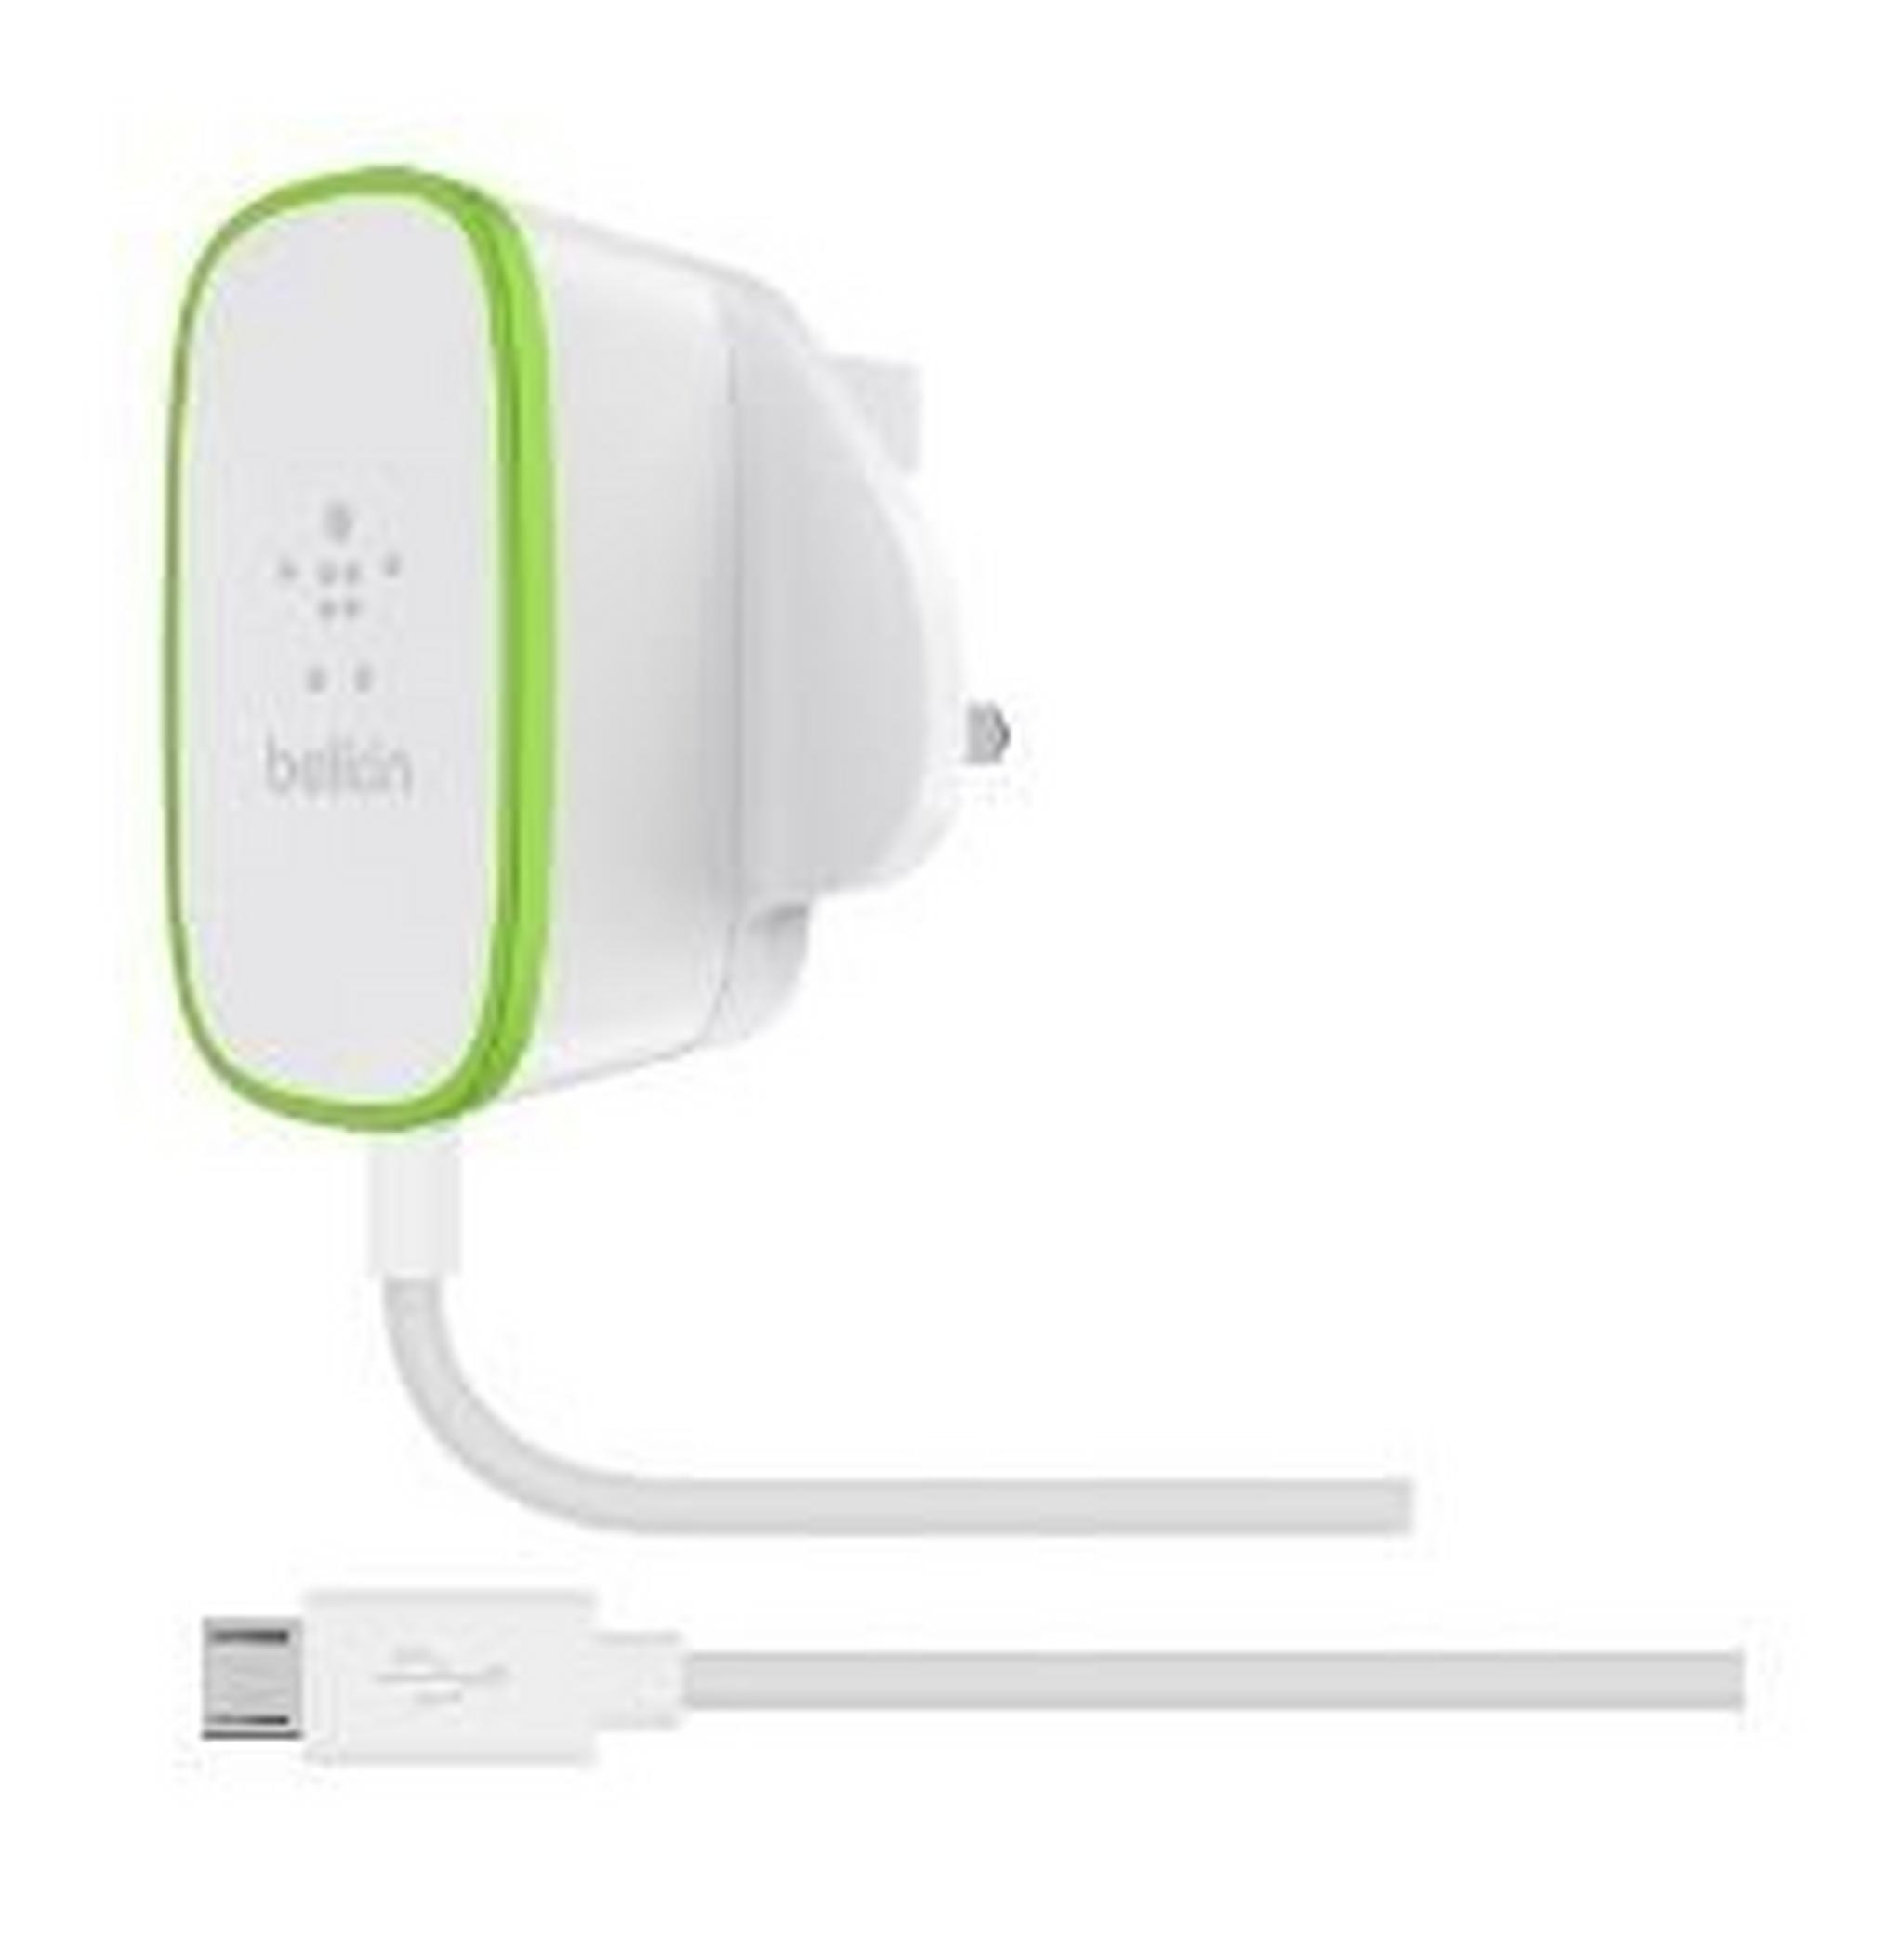 Belkin Home Charger With Micro-USB Cable - 1.8 Meter (F7U009DR06) - White